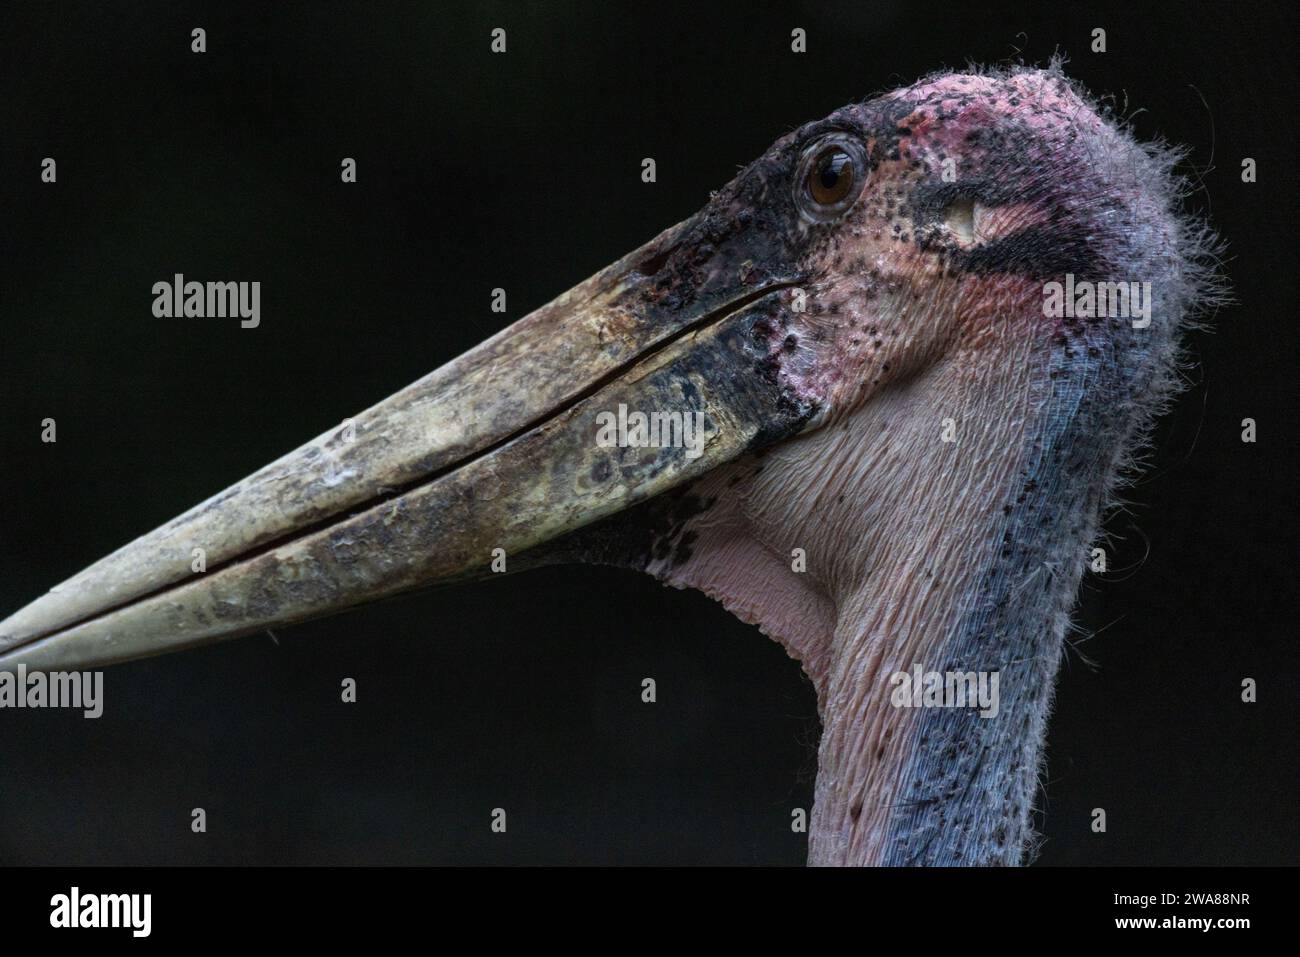 This close-up captures the raw, unfiltered presence of a Marabou Stork, a bird that might not conform to conventional definitions of beauty but holds a certain gravitas. Its long, pointed bill, suited for a scavenger's lifestyle, dominates the frame, showing signs of wear and a life led in the survival of the fittest. The stork's face, with its wrinkled pinkish head, sparse feathering, and penetrating eyes, exudes a sense of resilience and ancient wisdom. The dark backdrop accentuates the stark reality of this creature's existence in the wild. Gaze of the Marabou Stork. High quality photo Stock Photo